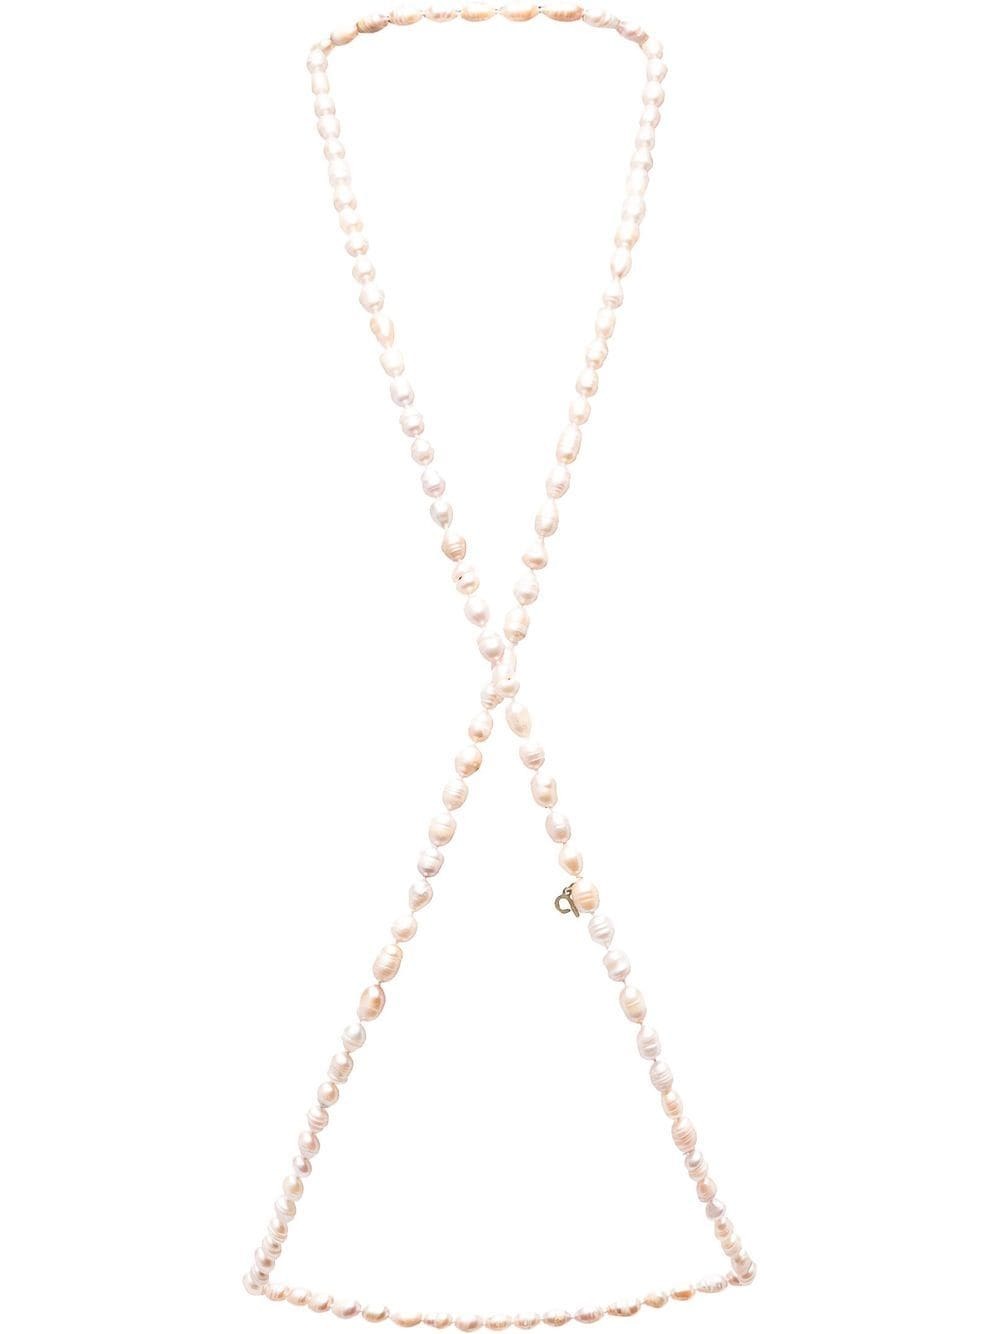 Parlor pearl-embellished body jewellery - Neutrals